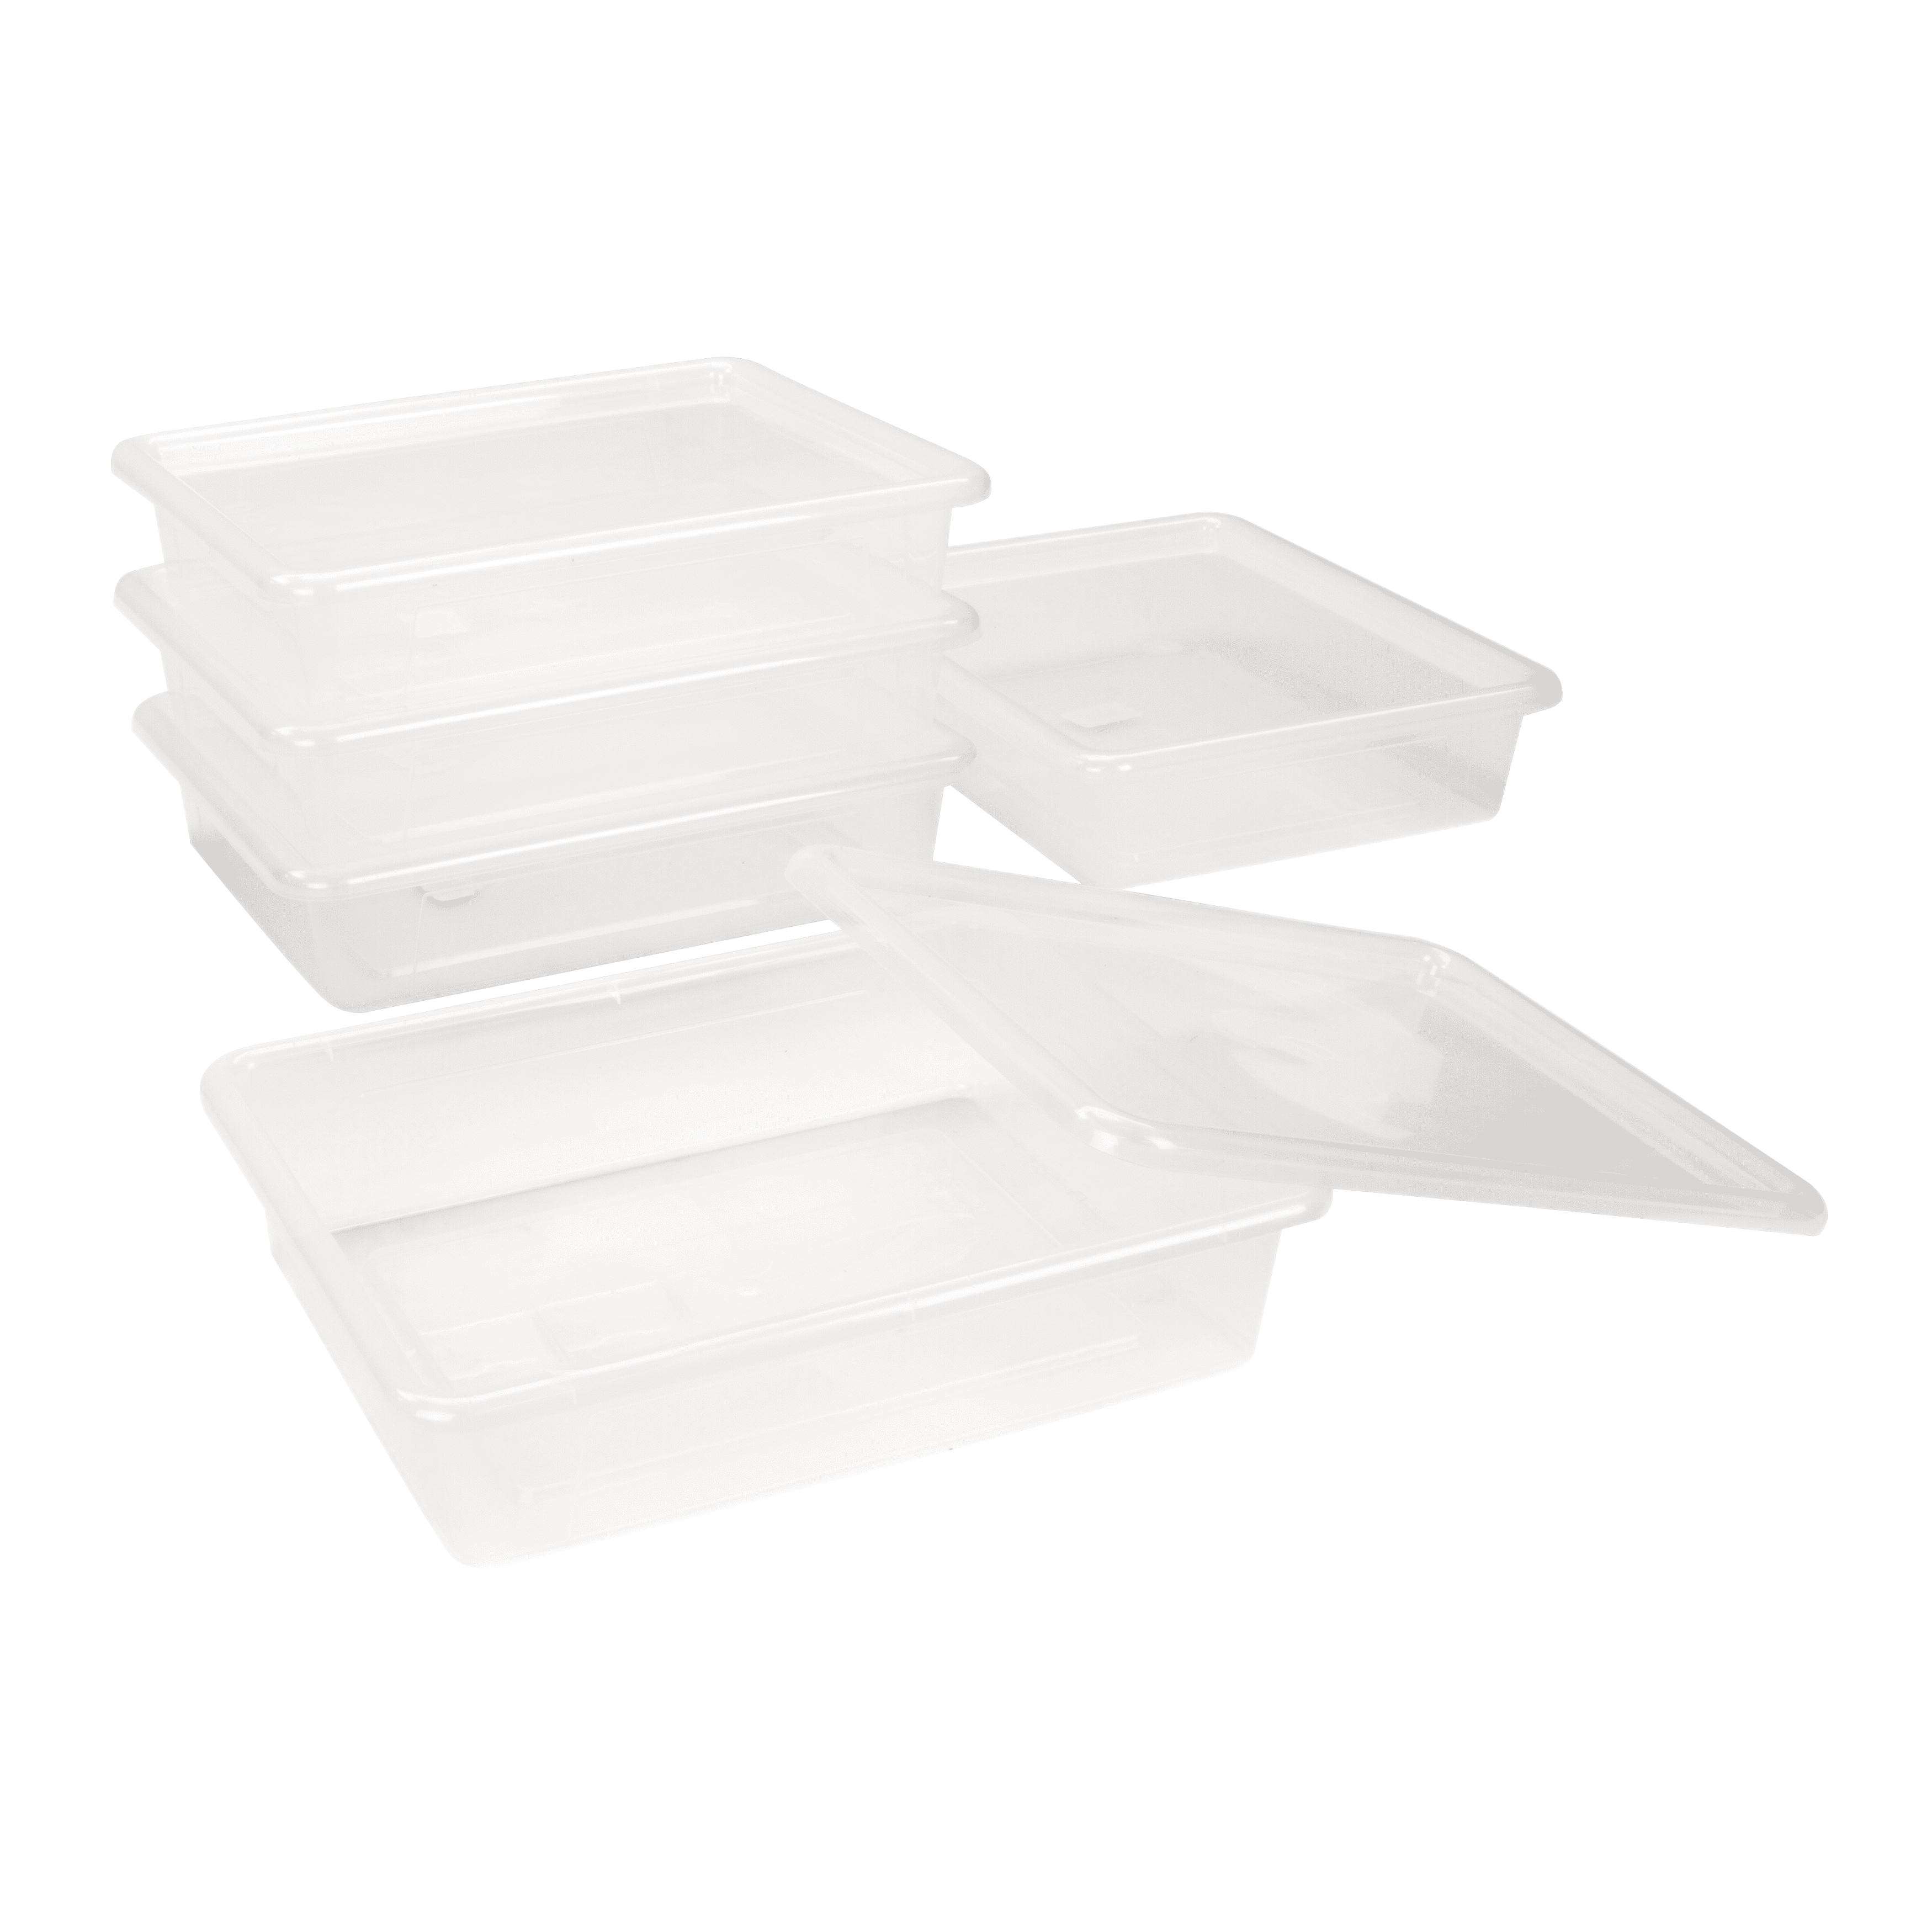 1 Assorted Colors Flat Storage Tray with Lid 5-Pack Letter Size 10 x 13 x 3 Inches